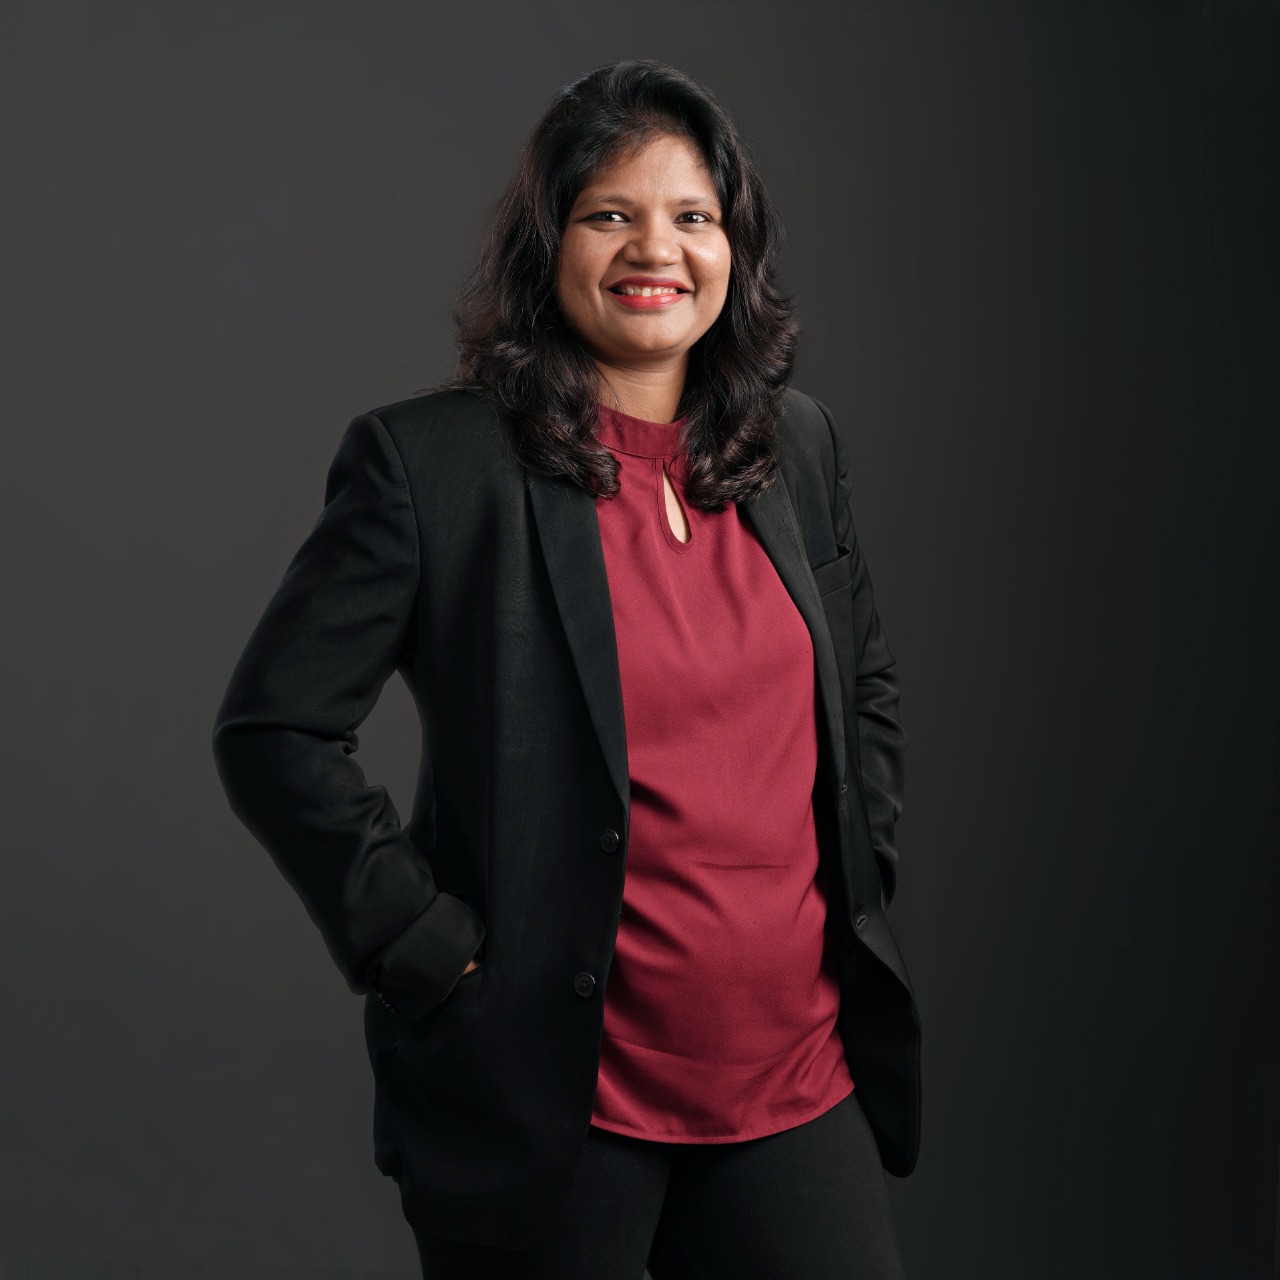 Ashwini Parab, Assistant Vice President – Service and Operations